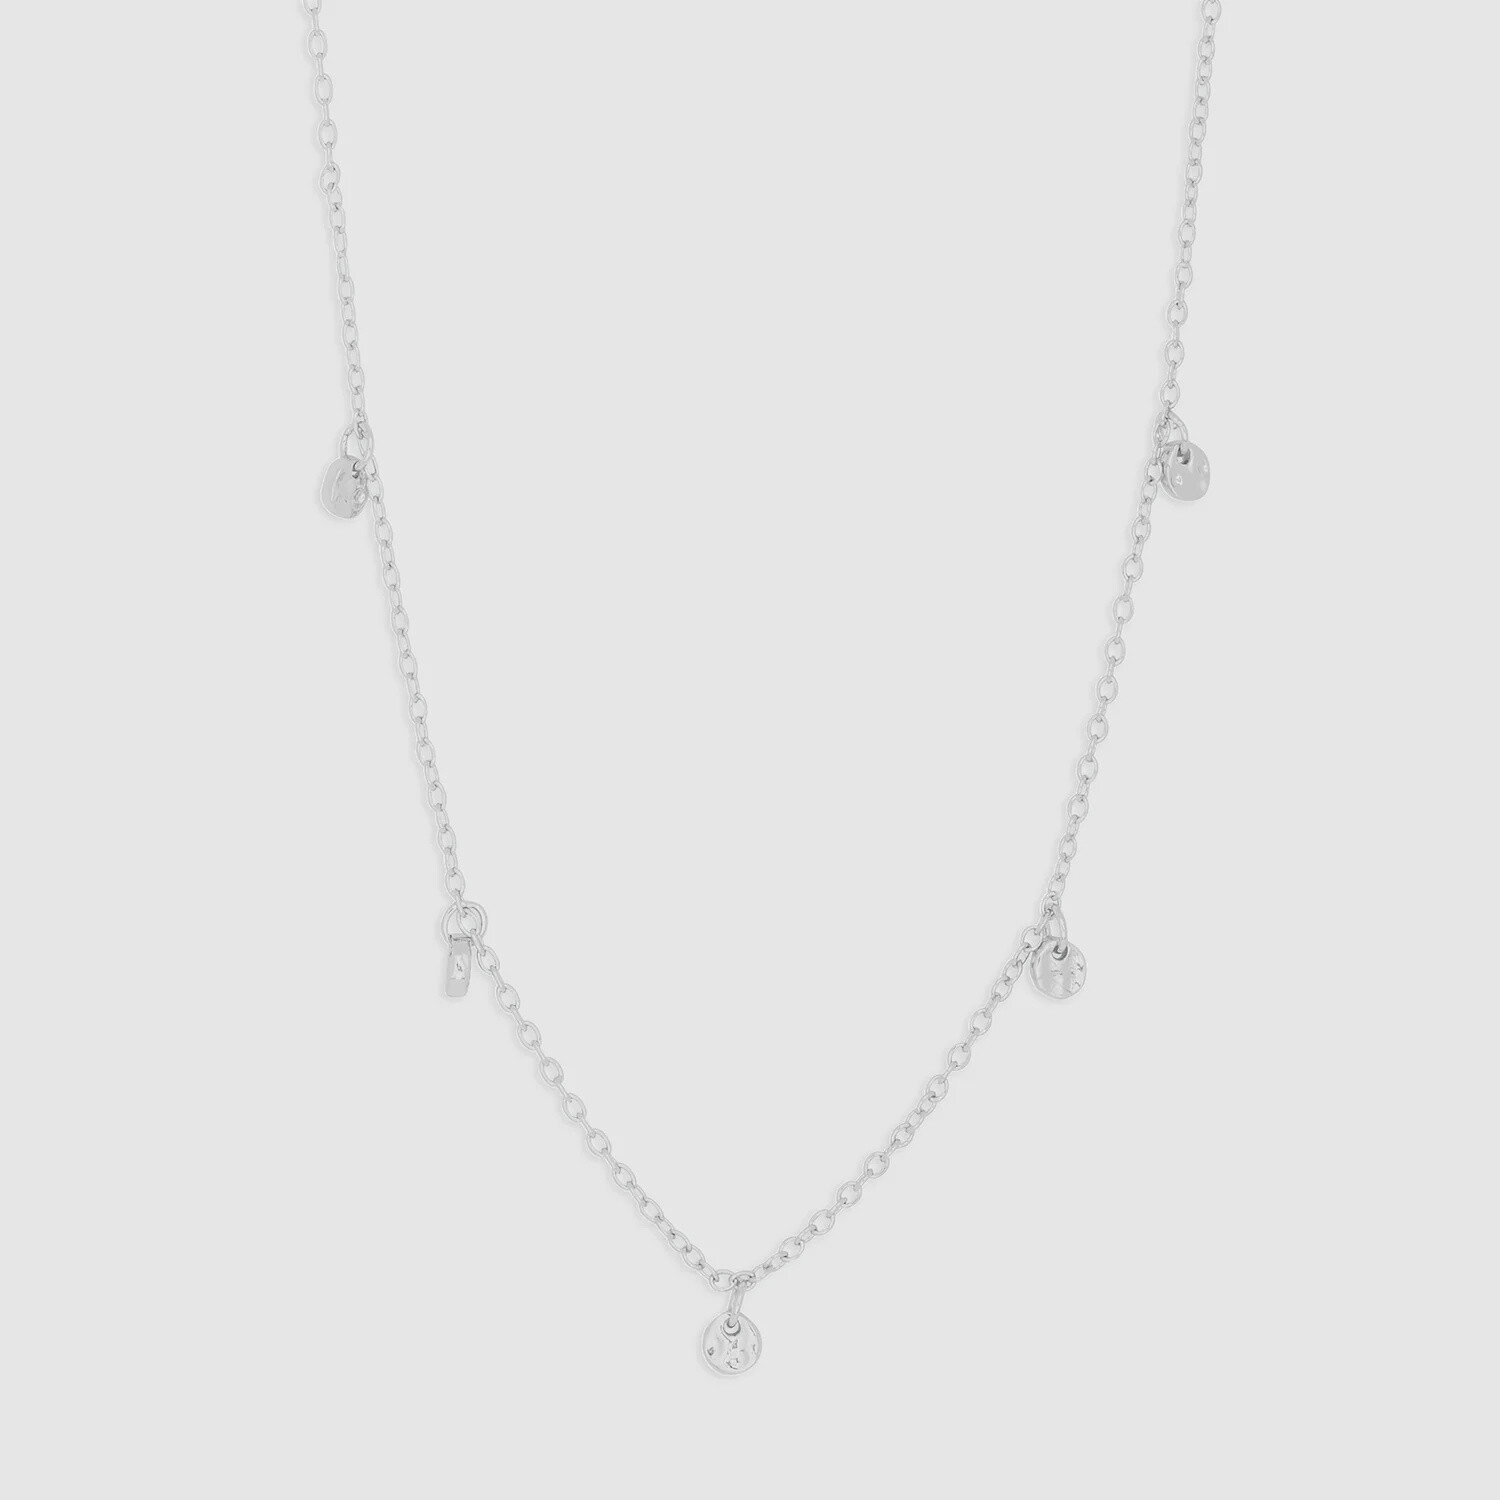 5 Disc Choker - Silver Necklace